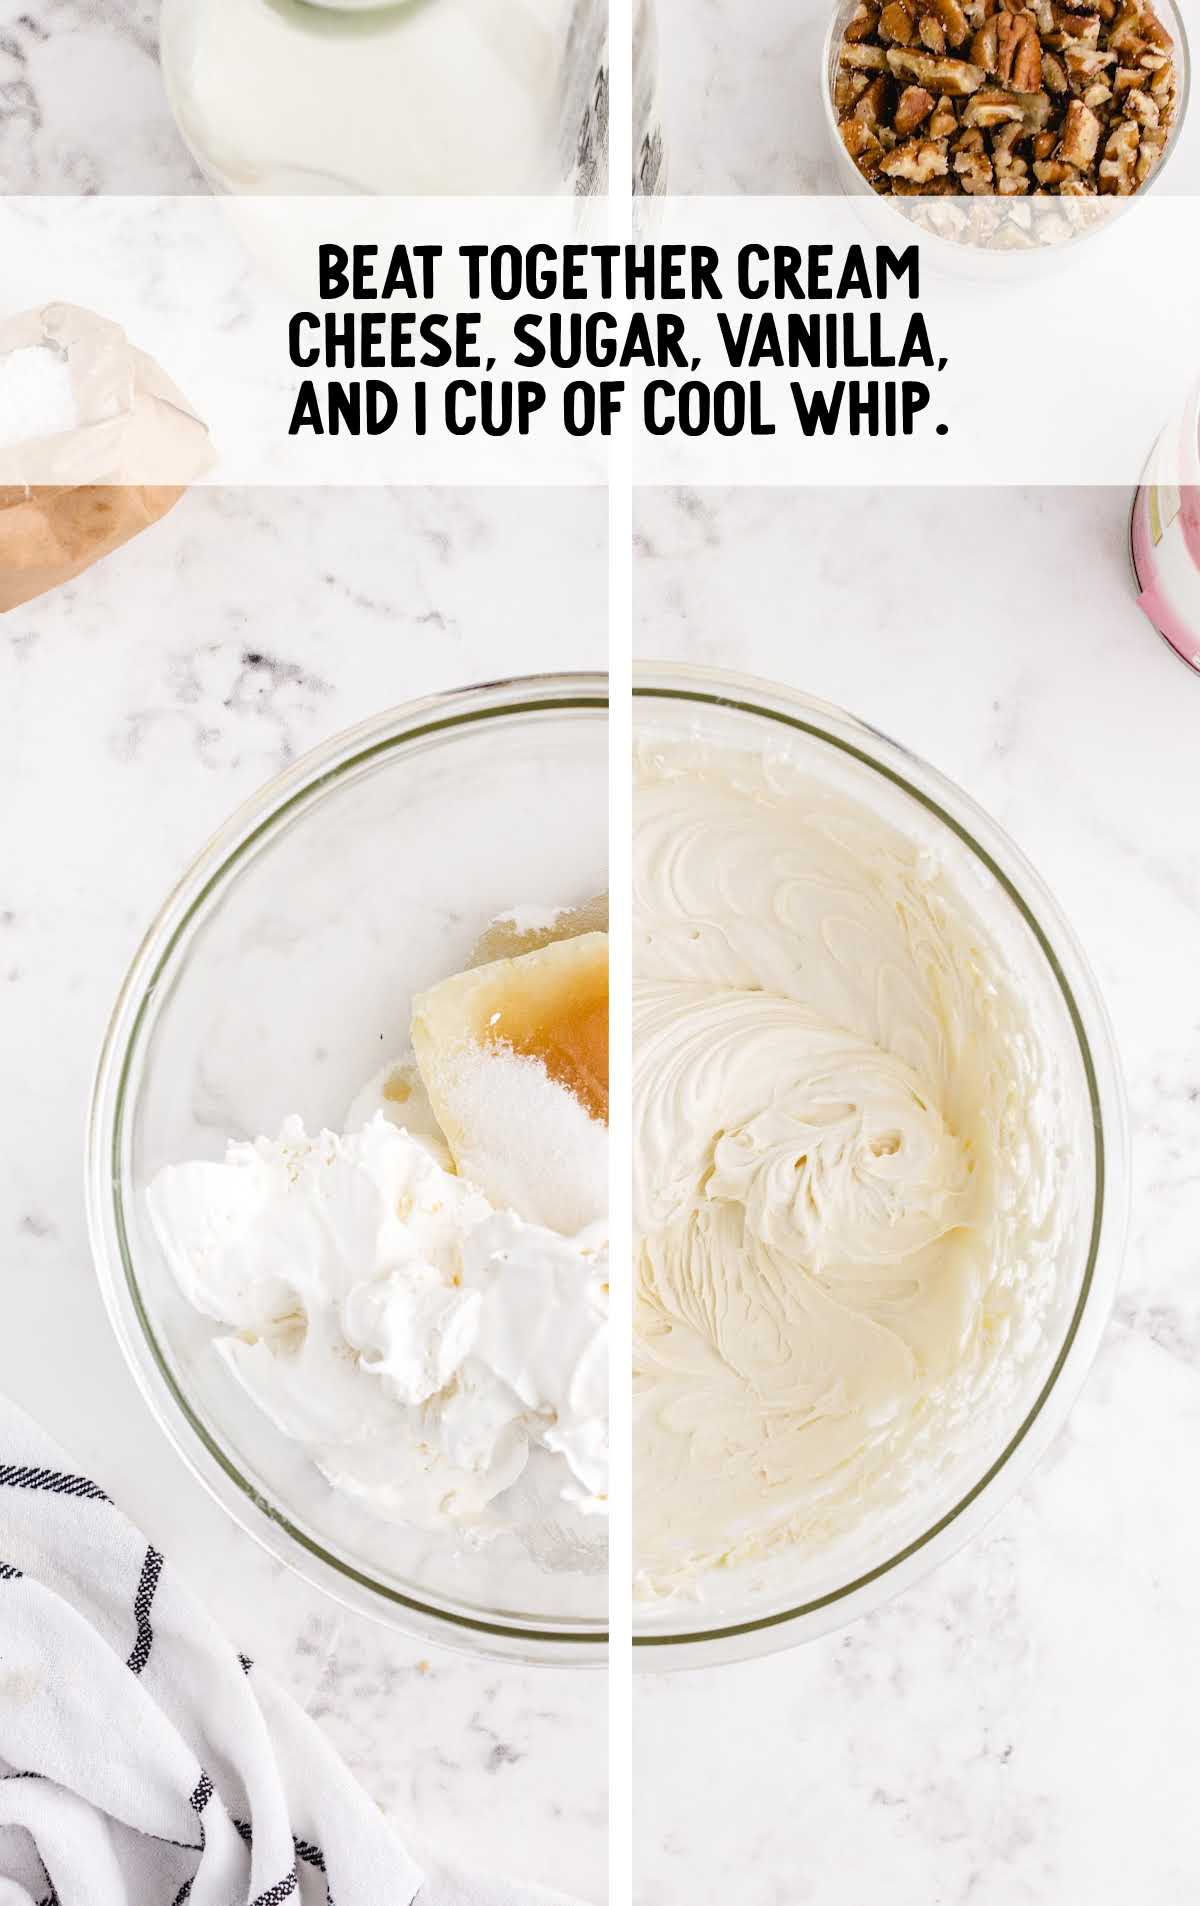 cream cheese, sugar, vanilla, and cool whip combined together